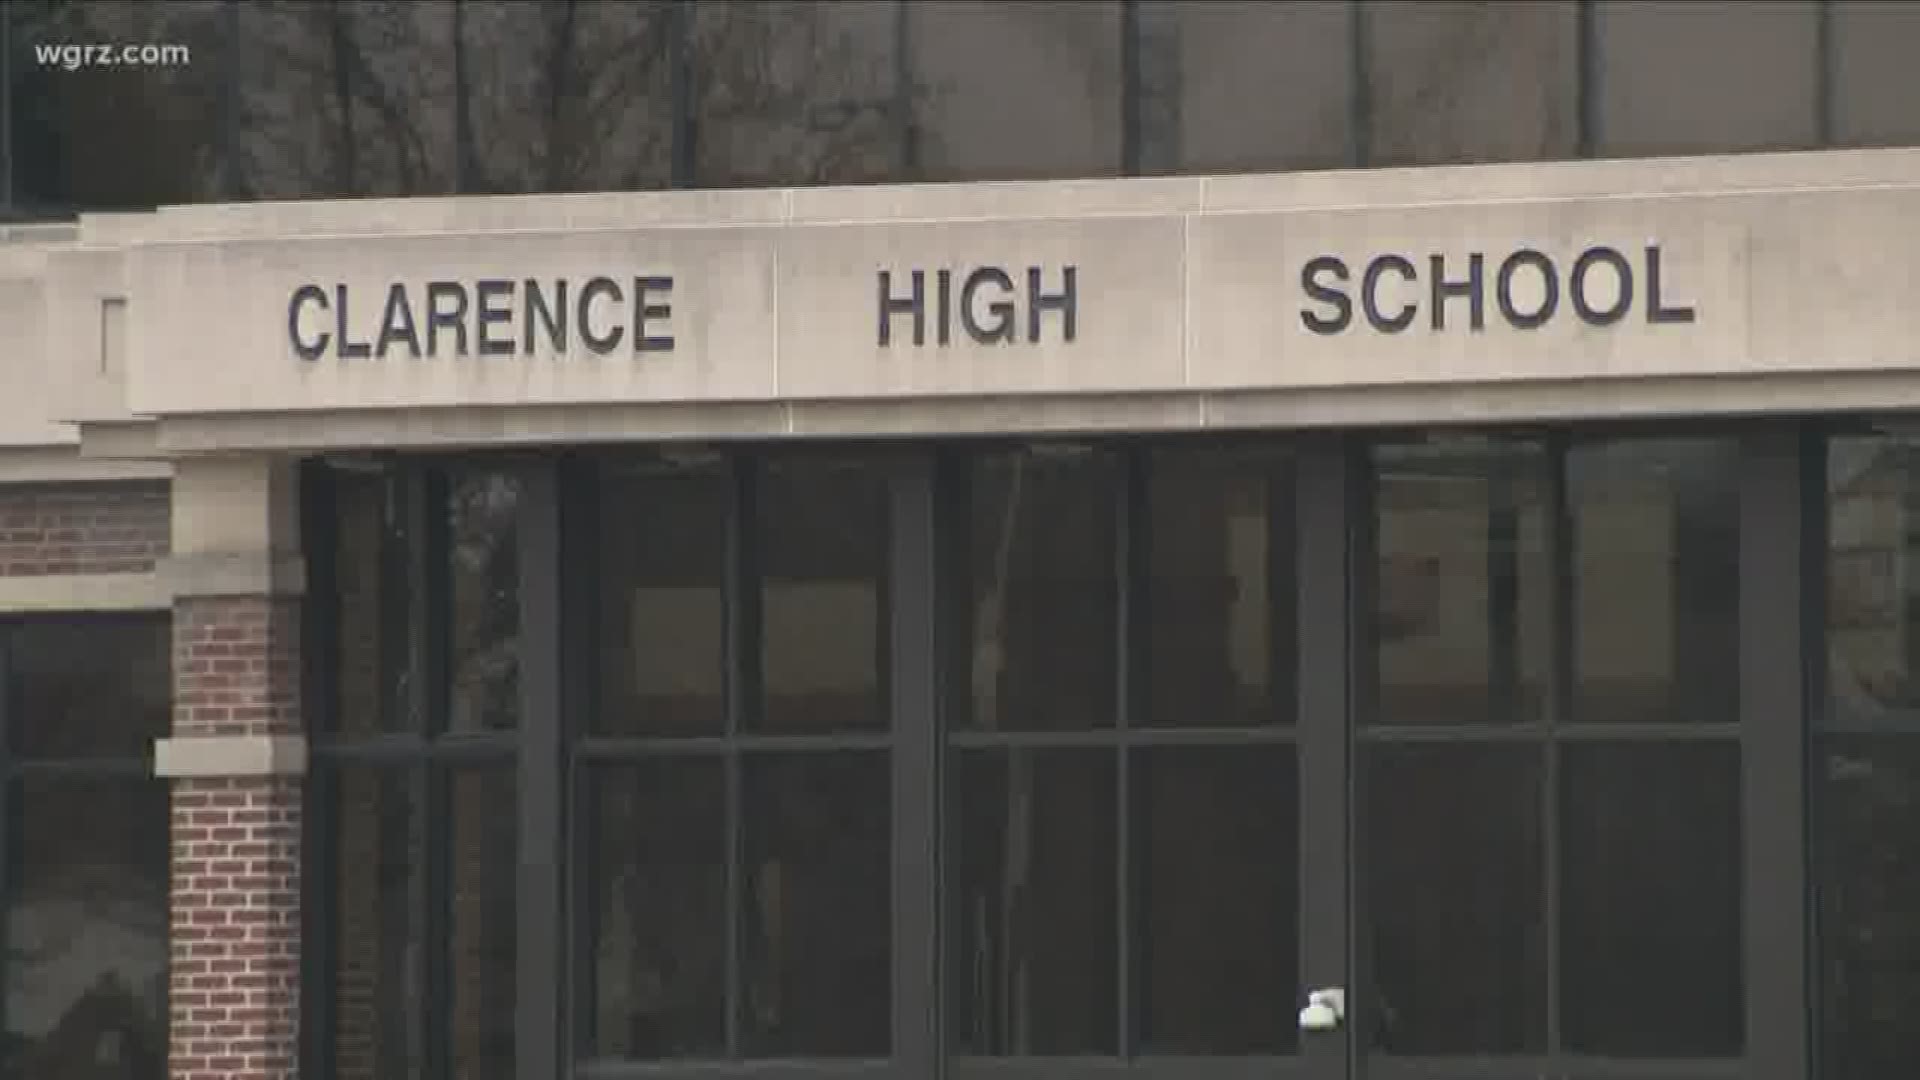 Parents are being offered refunds by district after it says it has "exhausted all options".